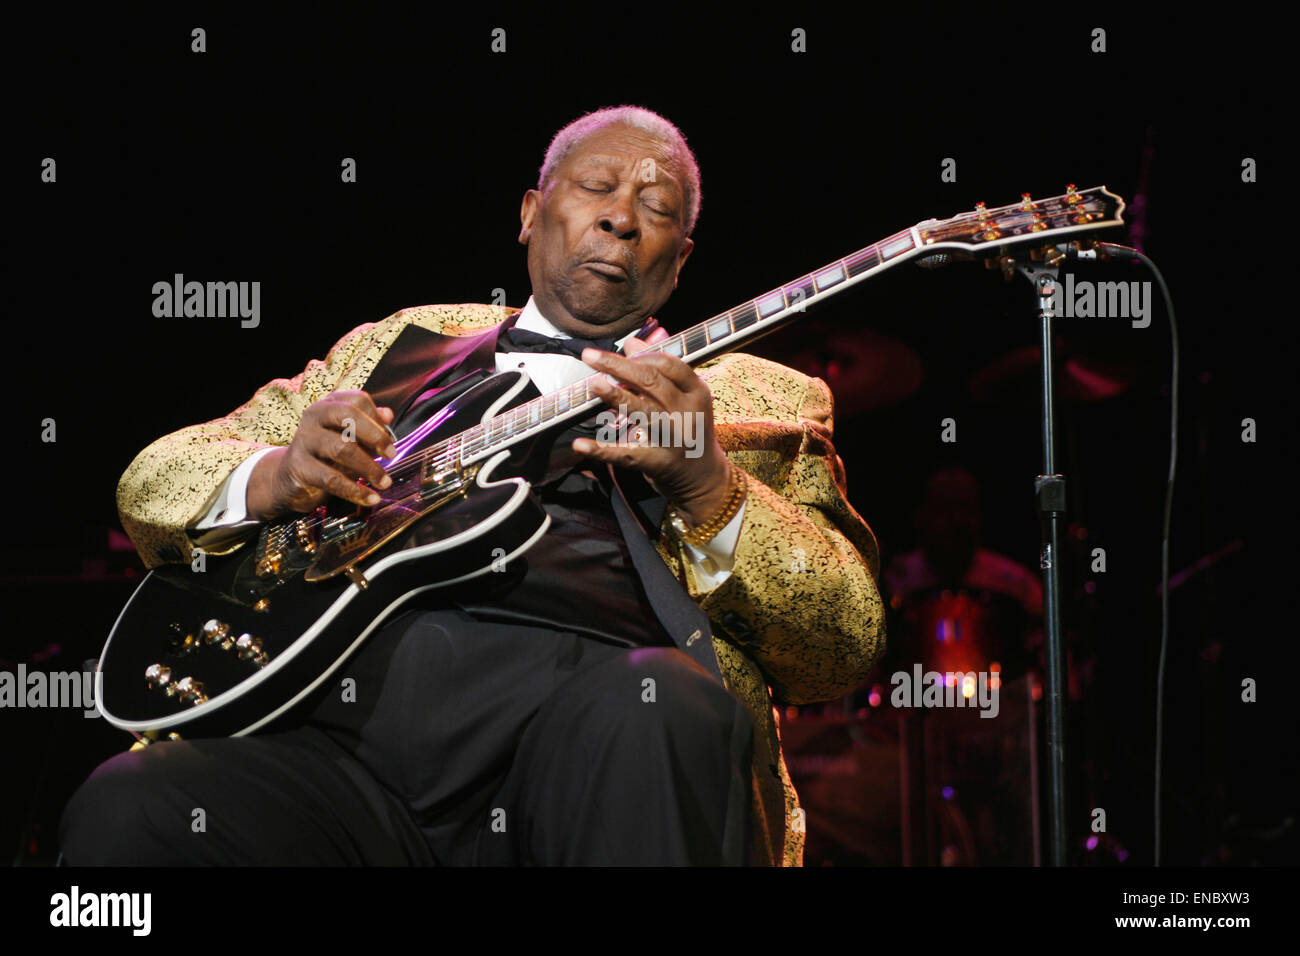 File. 1st May, 2015. Blues legend B.B. KING has entered into hospice care Friday at his home in Las Vegas. The 89-year-old musician posted thanks on his official website for fans' well-wishes and prayers after he returned home from a brief hospitalization, said L. Toney, King's longtime business manager and current power-of-attorney. Pictured: Aug 07, 2007 - New York - BB King performing live at Madison Square Garden's Theater. (Credit Image: © Aviv Small/ZUMA Press) Stock Photo